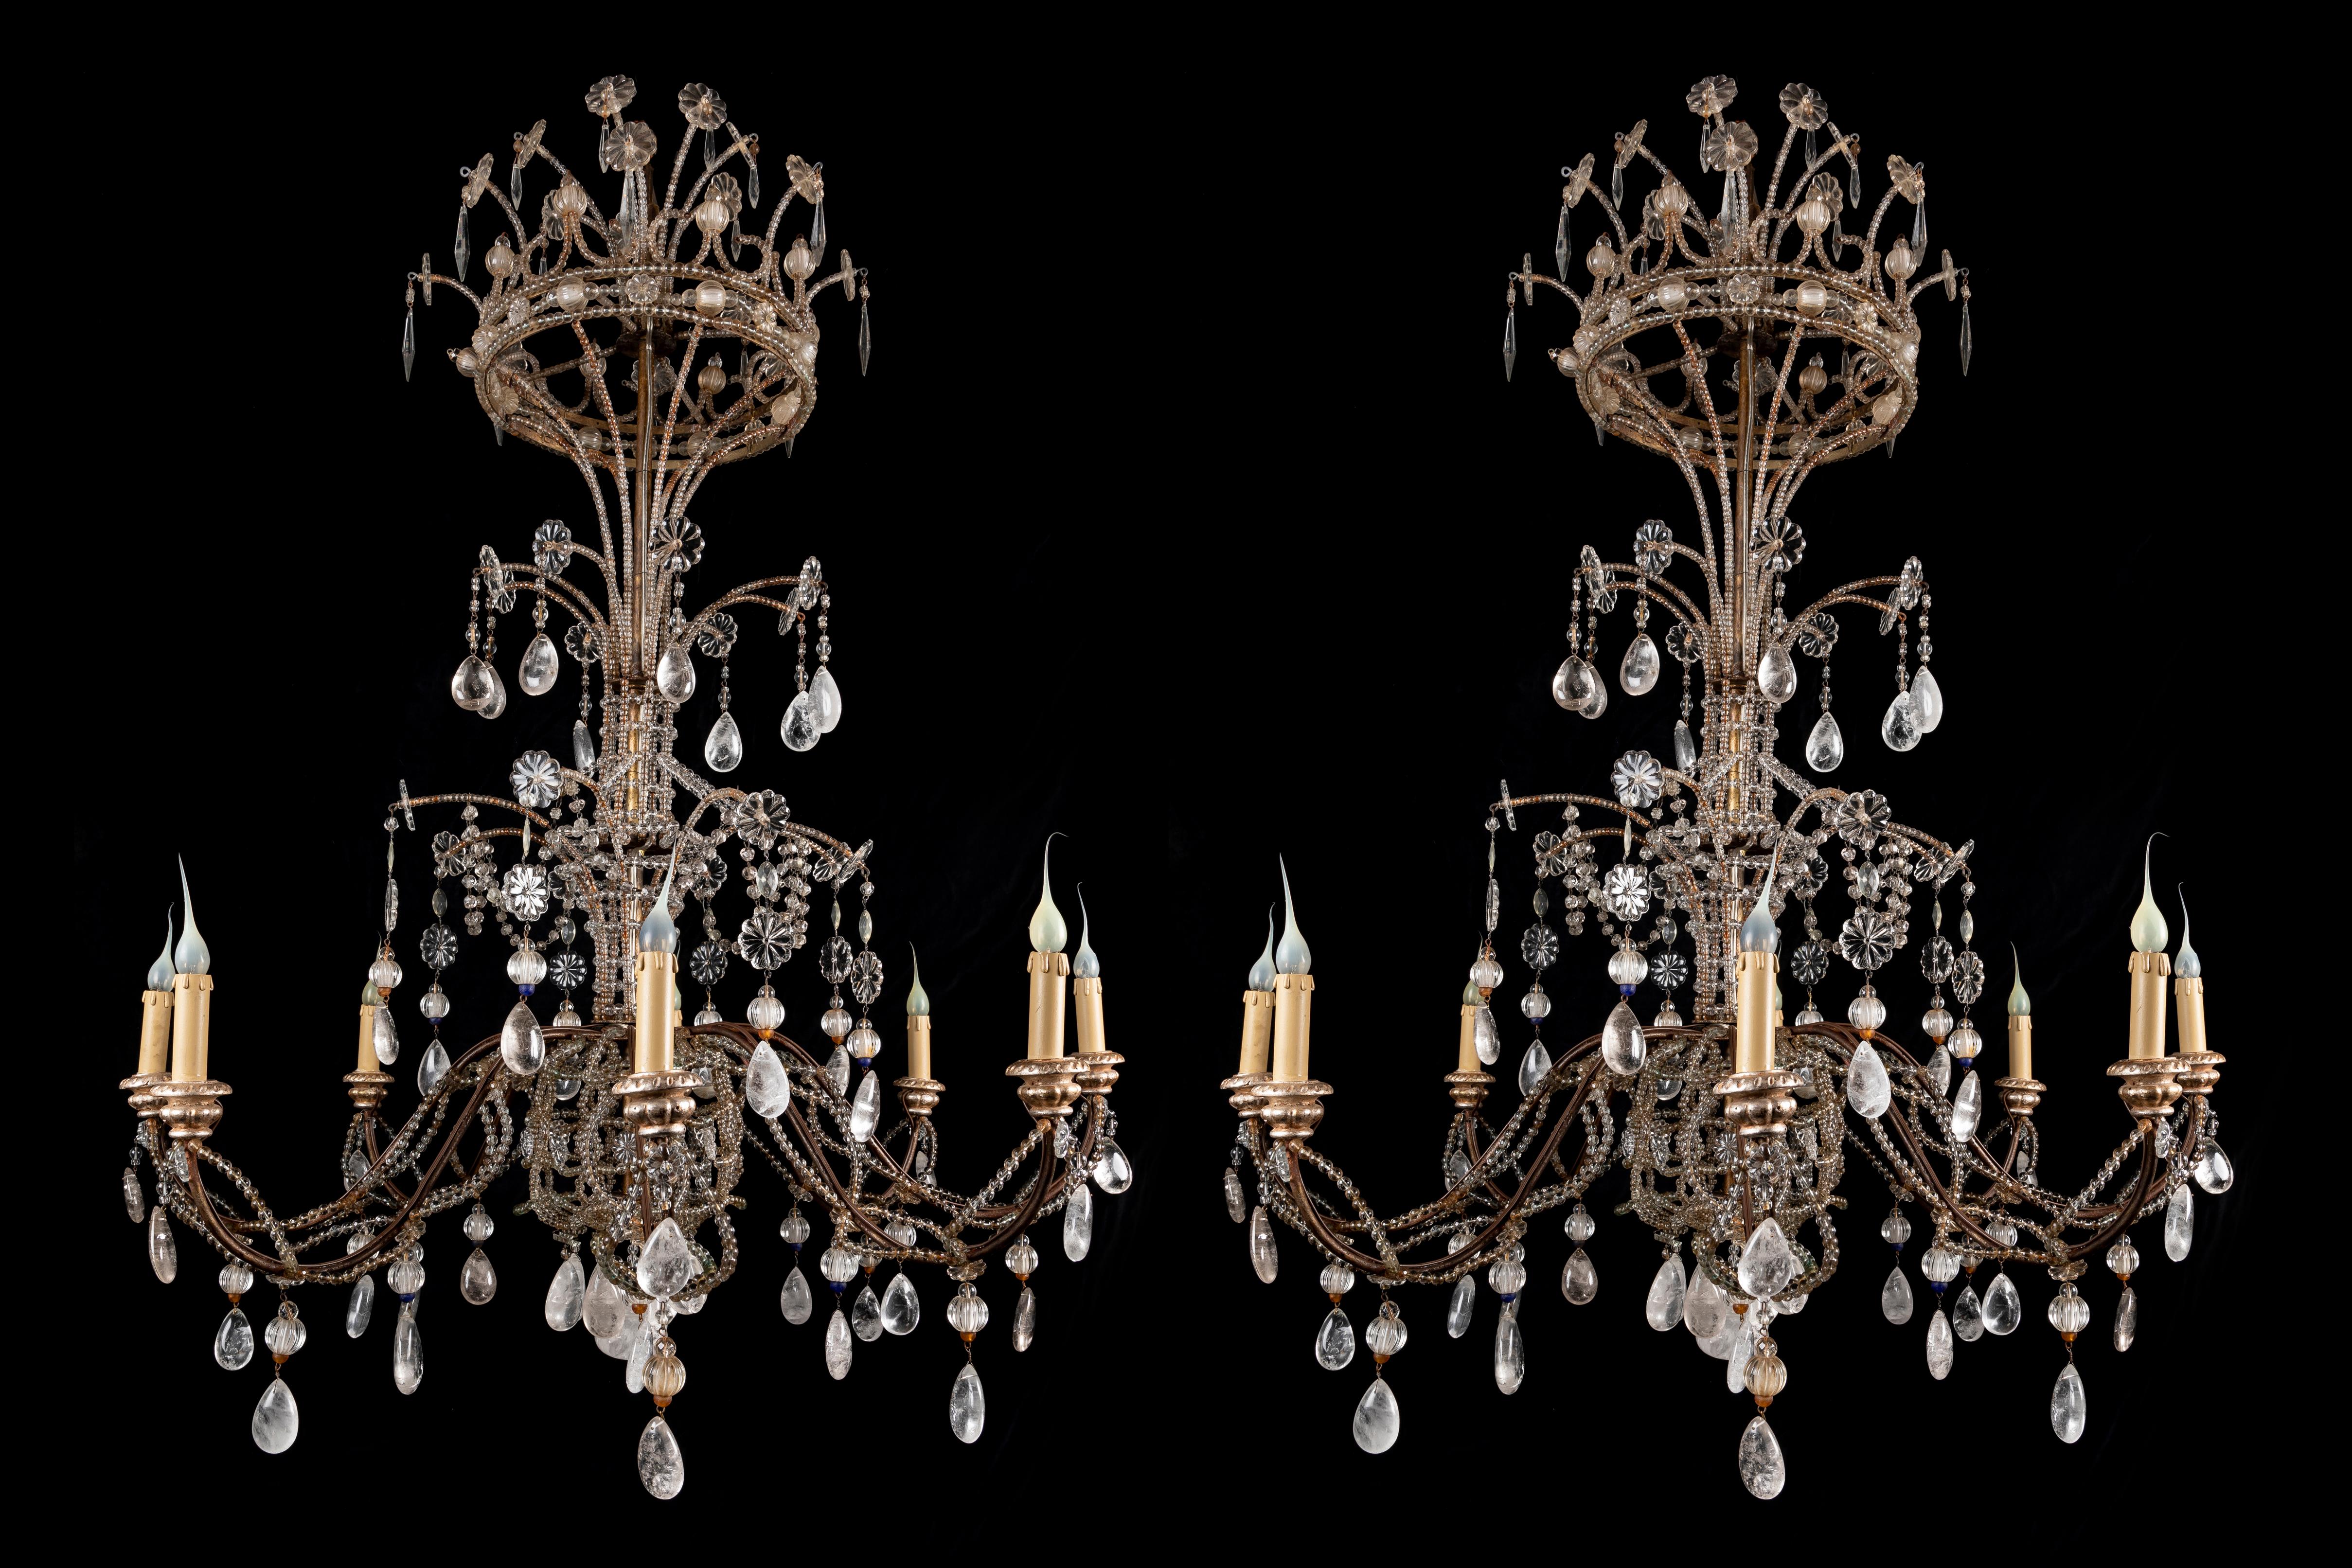 A Pair of very large and extremely unusual French Maison Bagues style cut rock crystal, beaded glass and cut crystal multi light triple tier chandeliers of exquisite craftsmanship. This exquisite pair of rock crystal chandeliers are embellished with